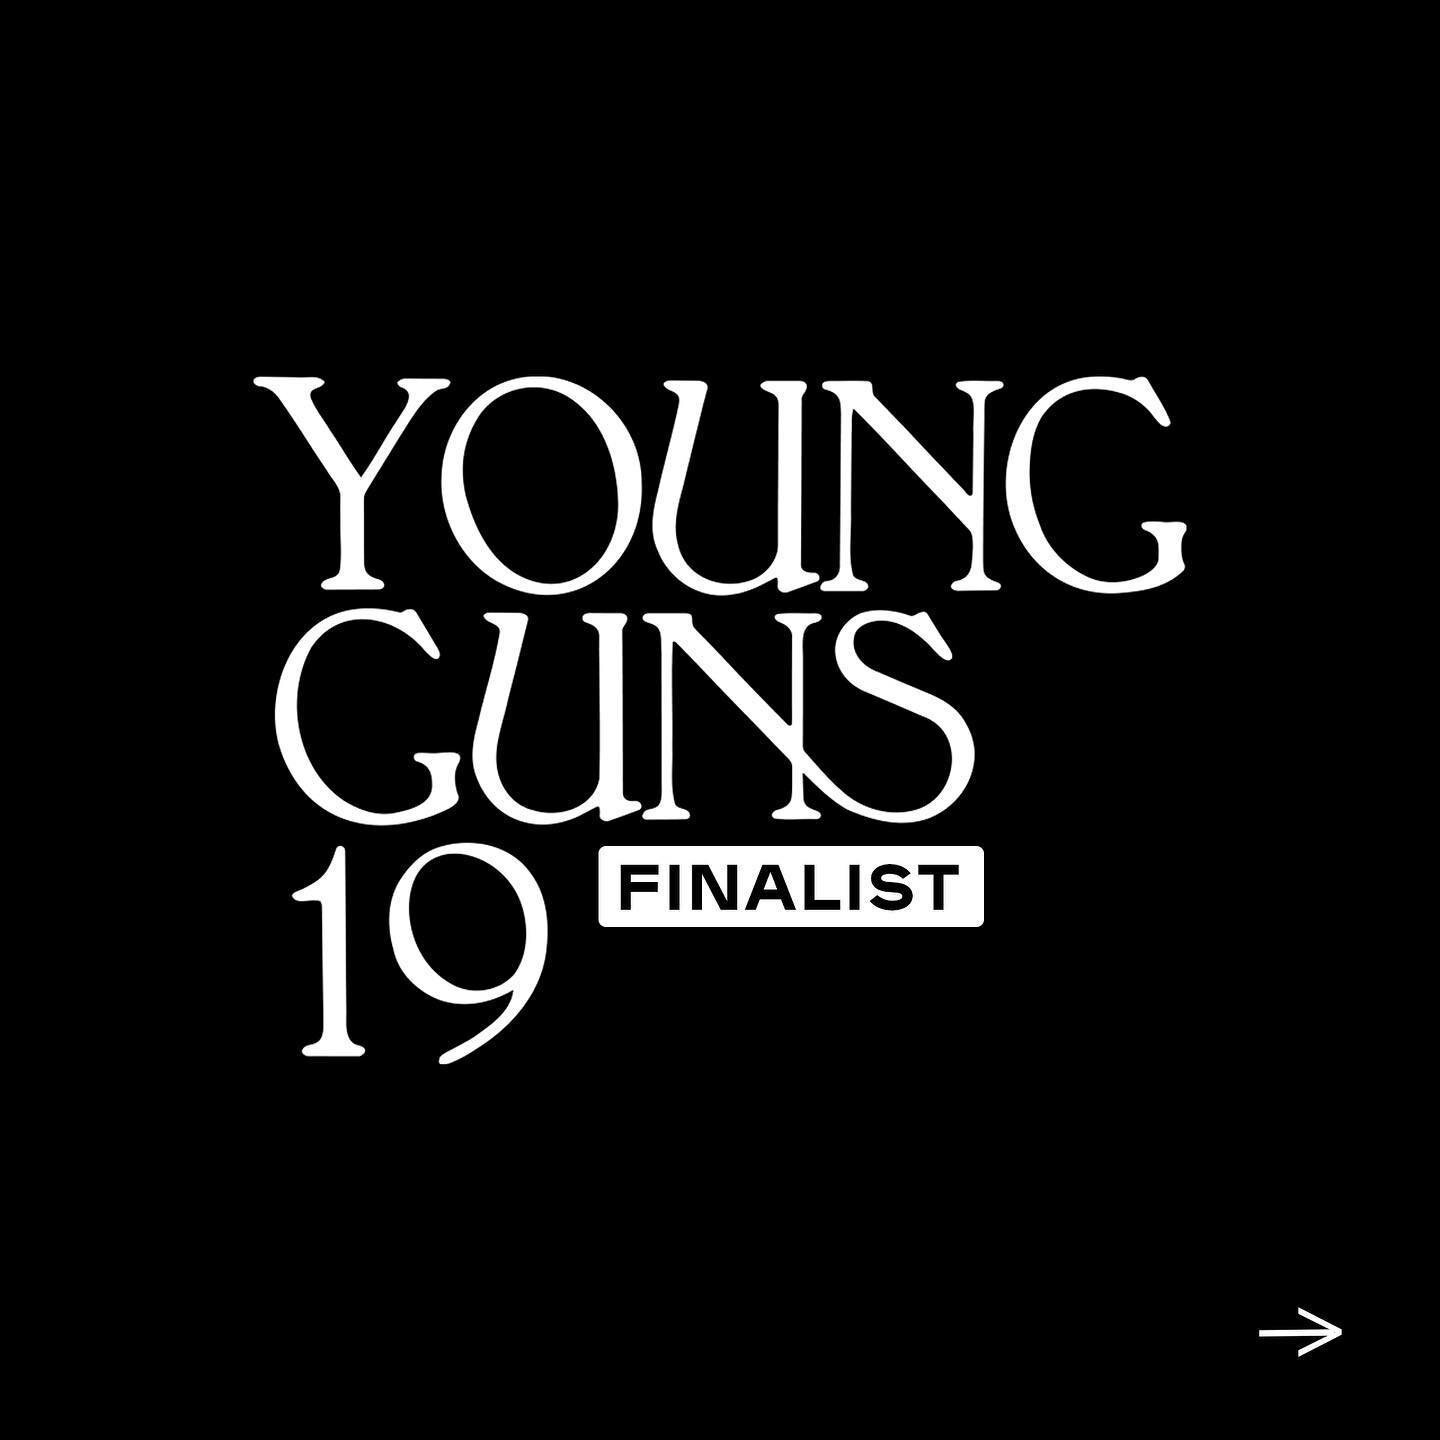 Excited to announce I&rsquo;ve been named Young Guns 19 Finalist!!
Fingers crossed!

The One Club for Creativity #YoungGuns19 #YG19 #OneClub
https://bit.ly/3hWYg9F